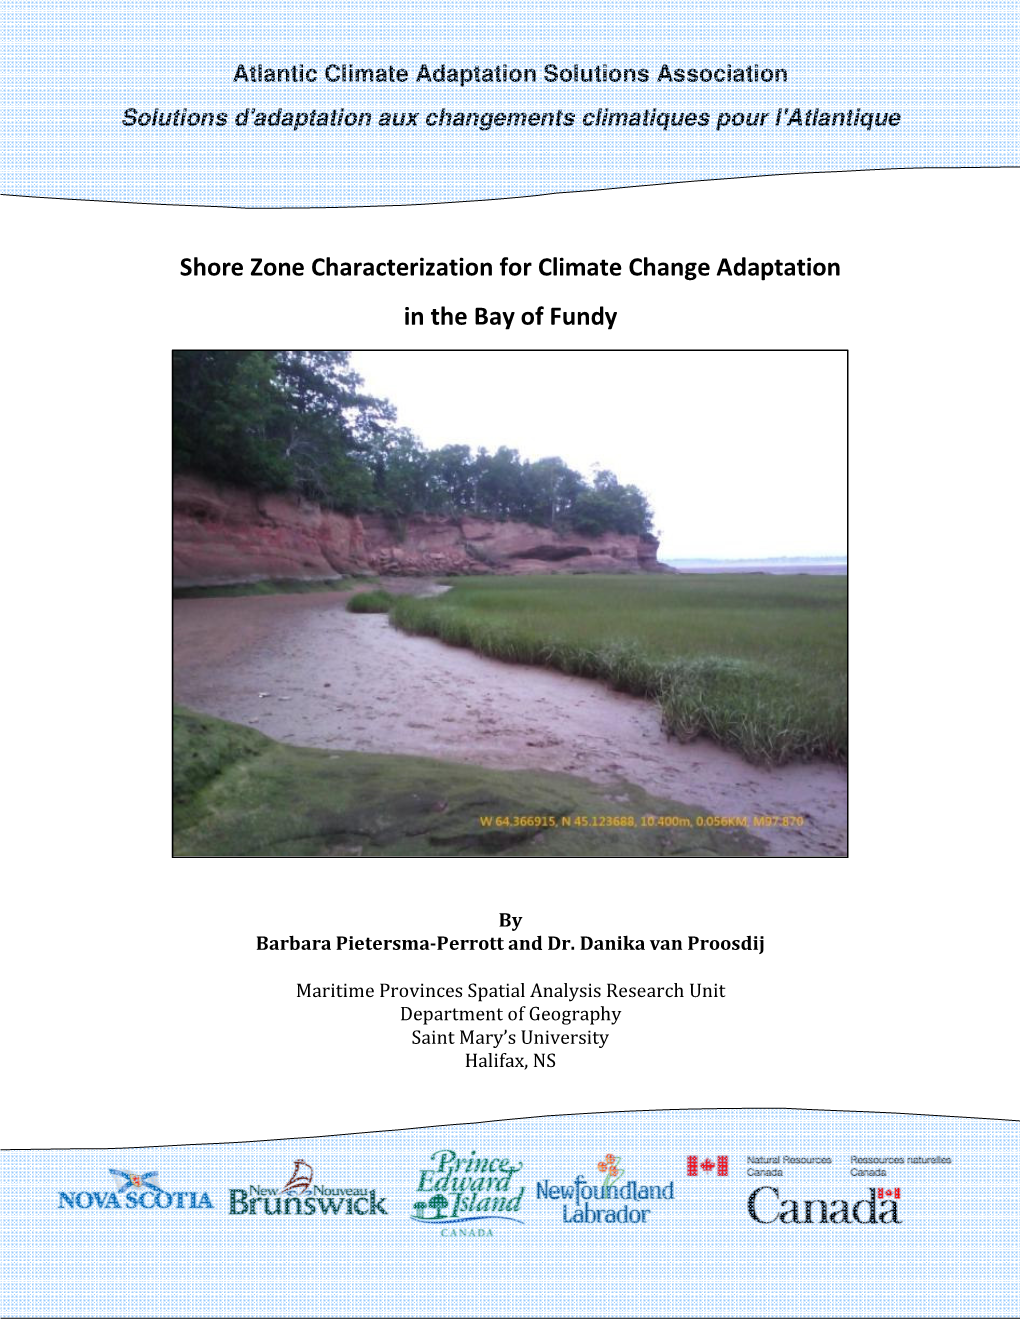 Shore Zone Characterization for Climate Change Adaptation in the Bay of Fundy